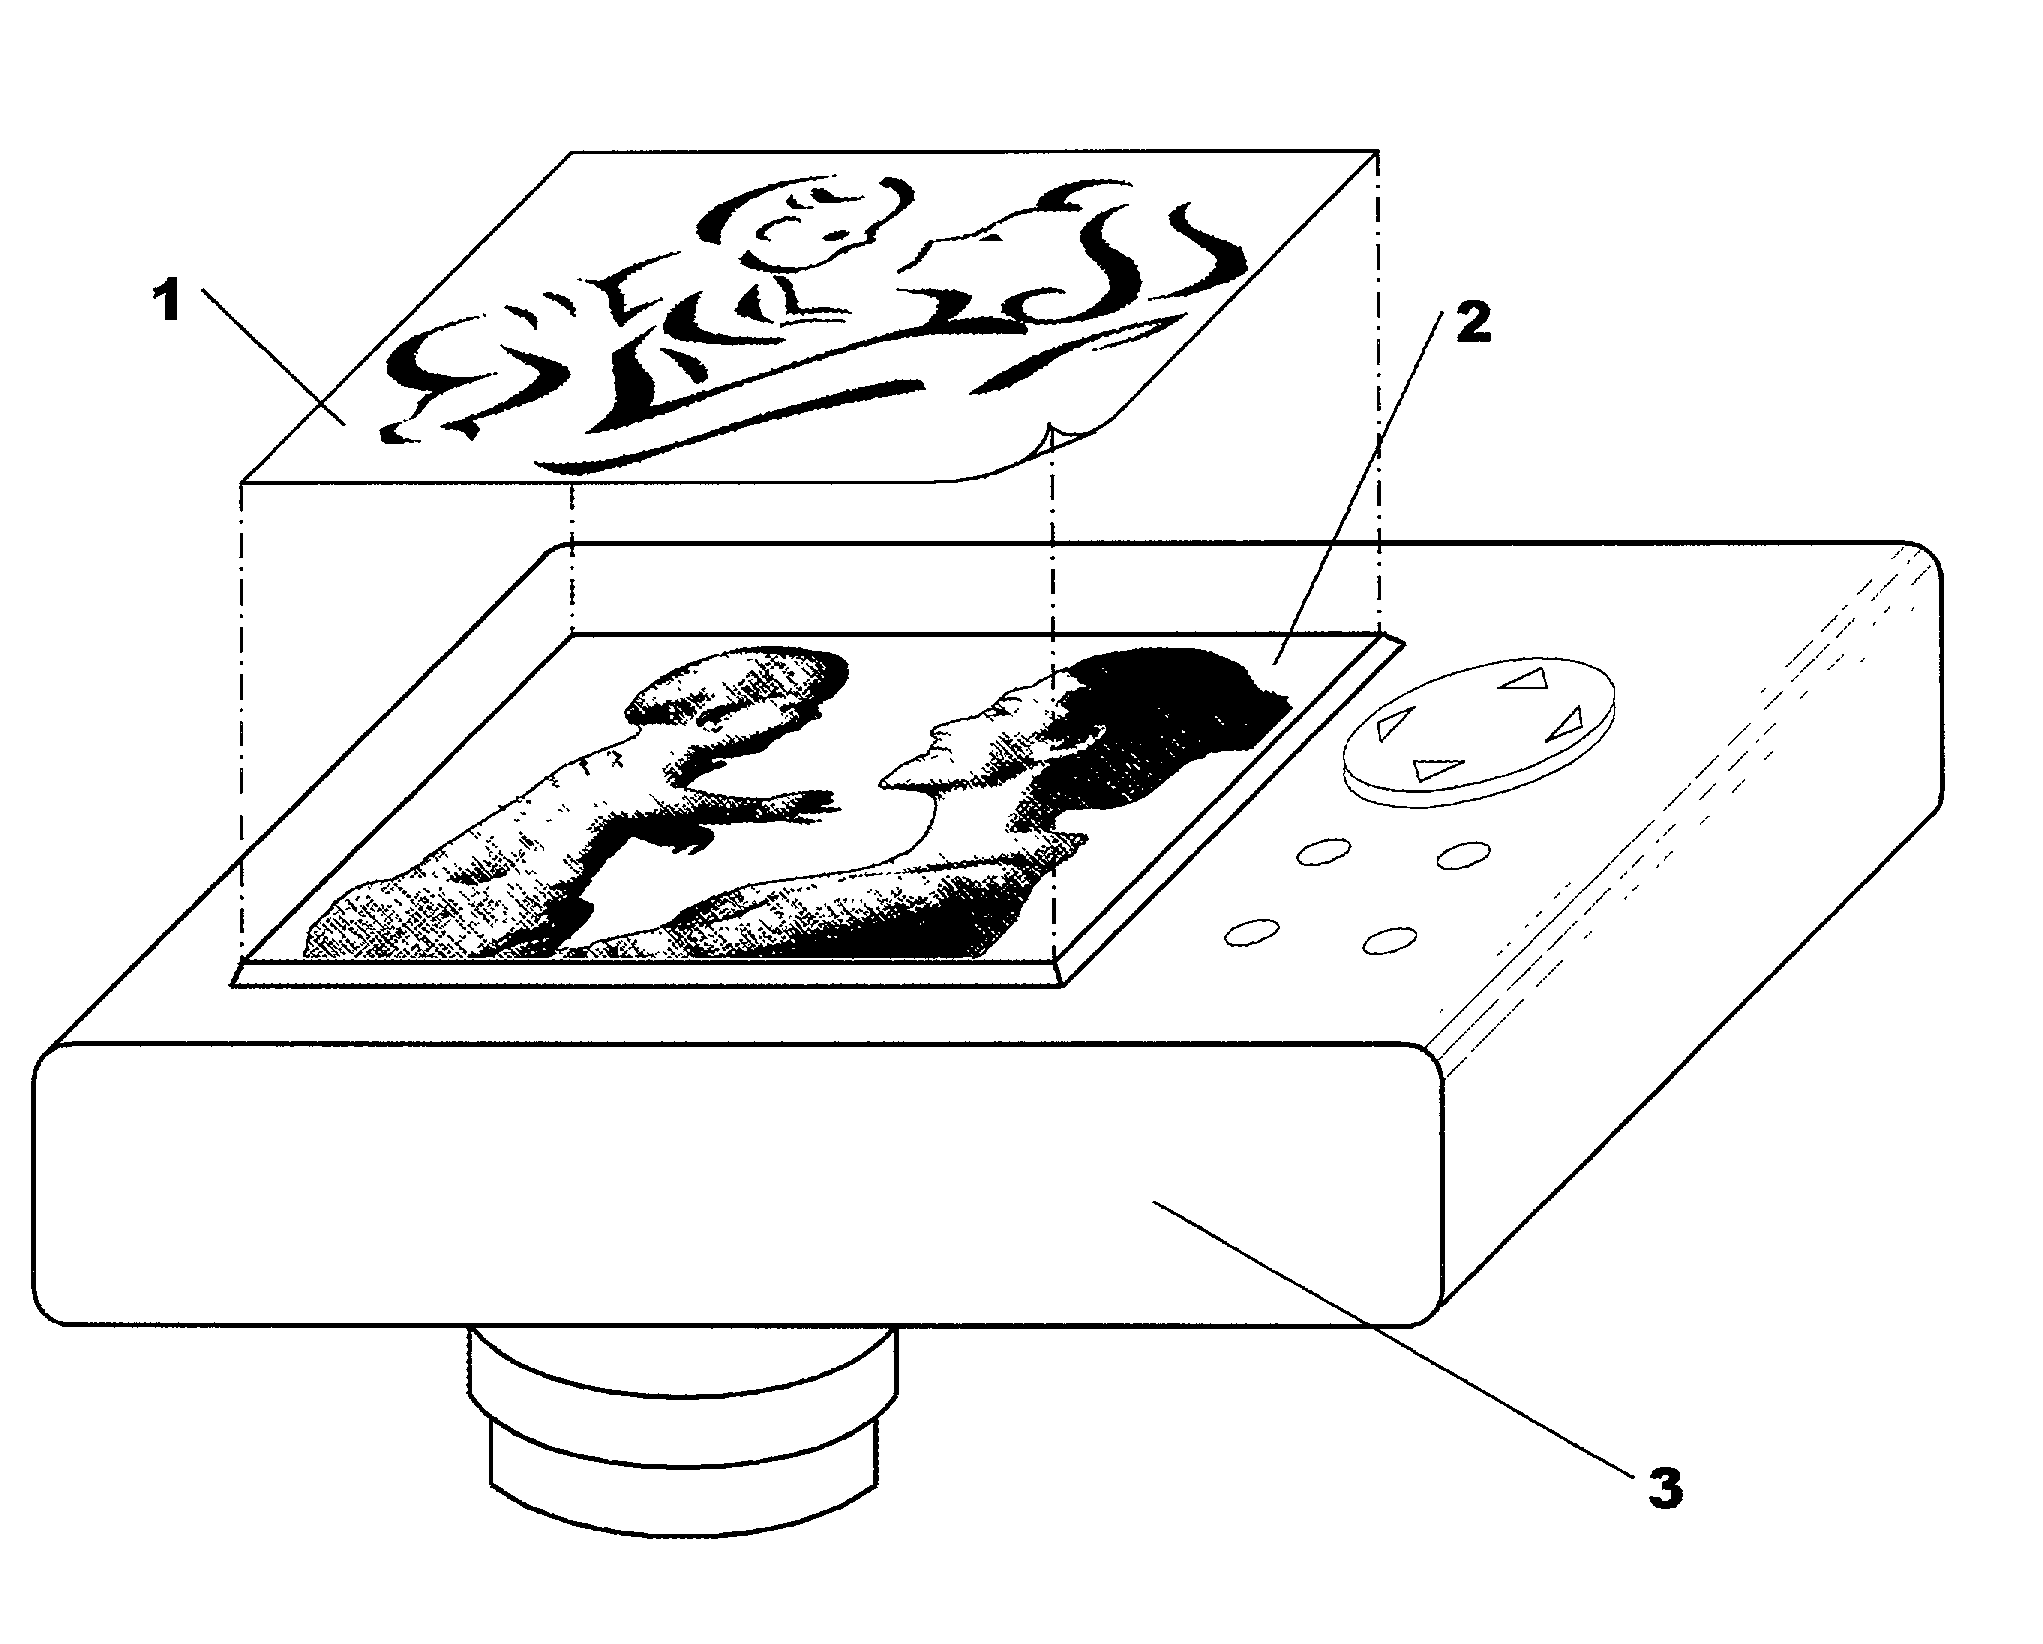 Camera assisted method and apparatus for improving composition of photography